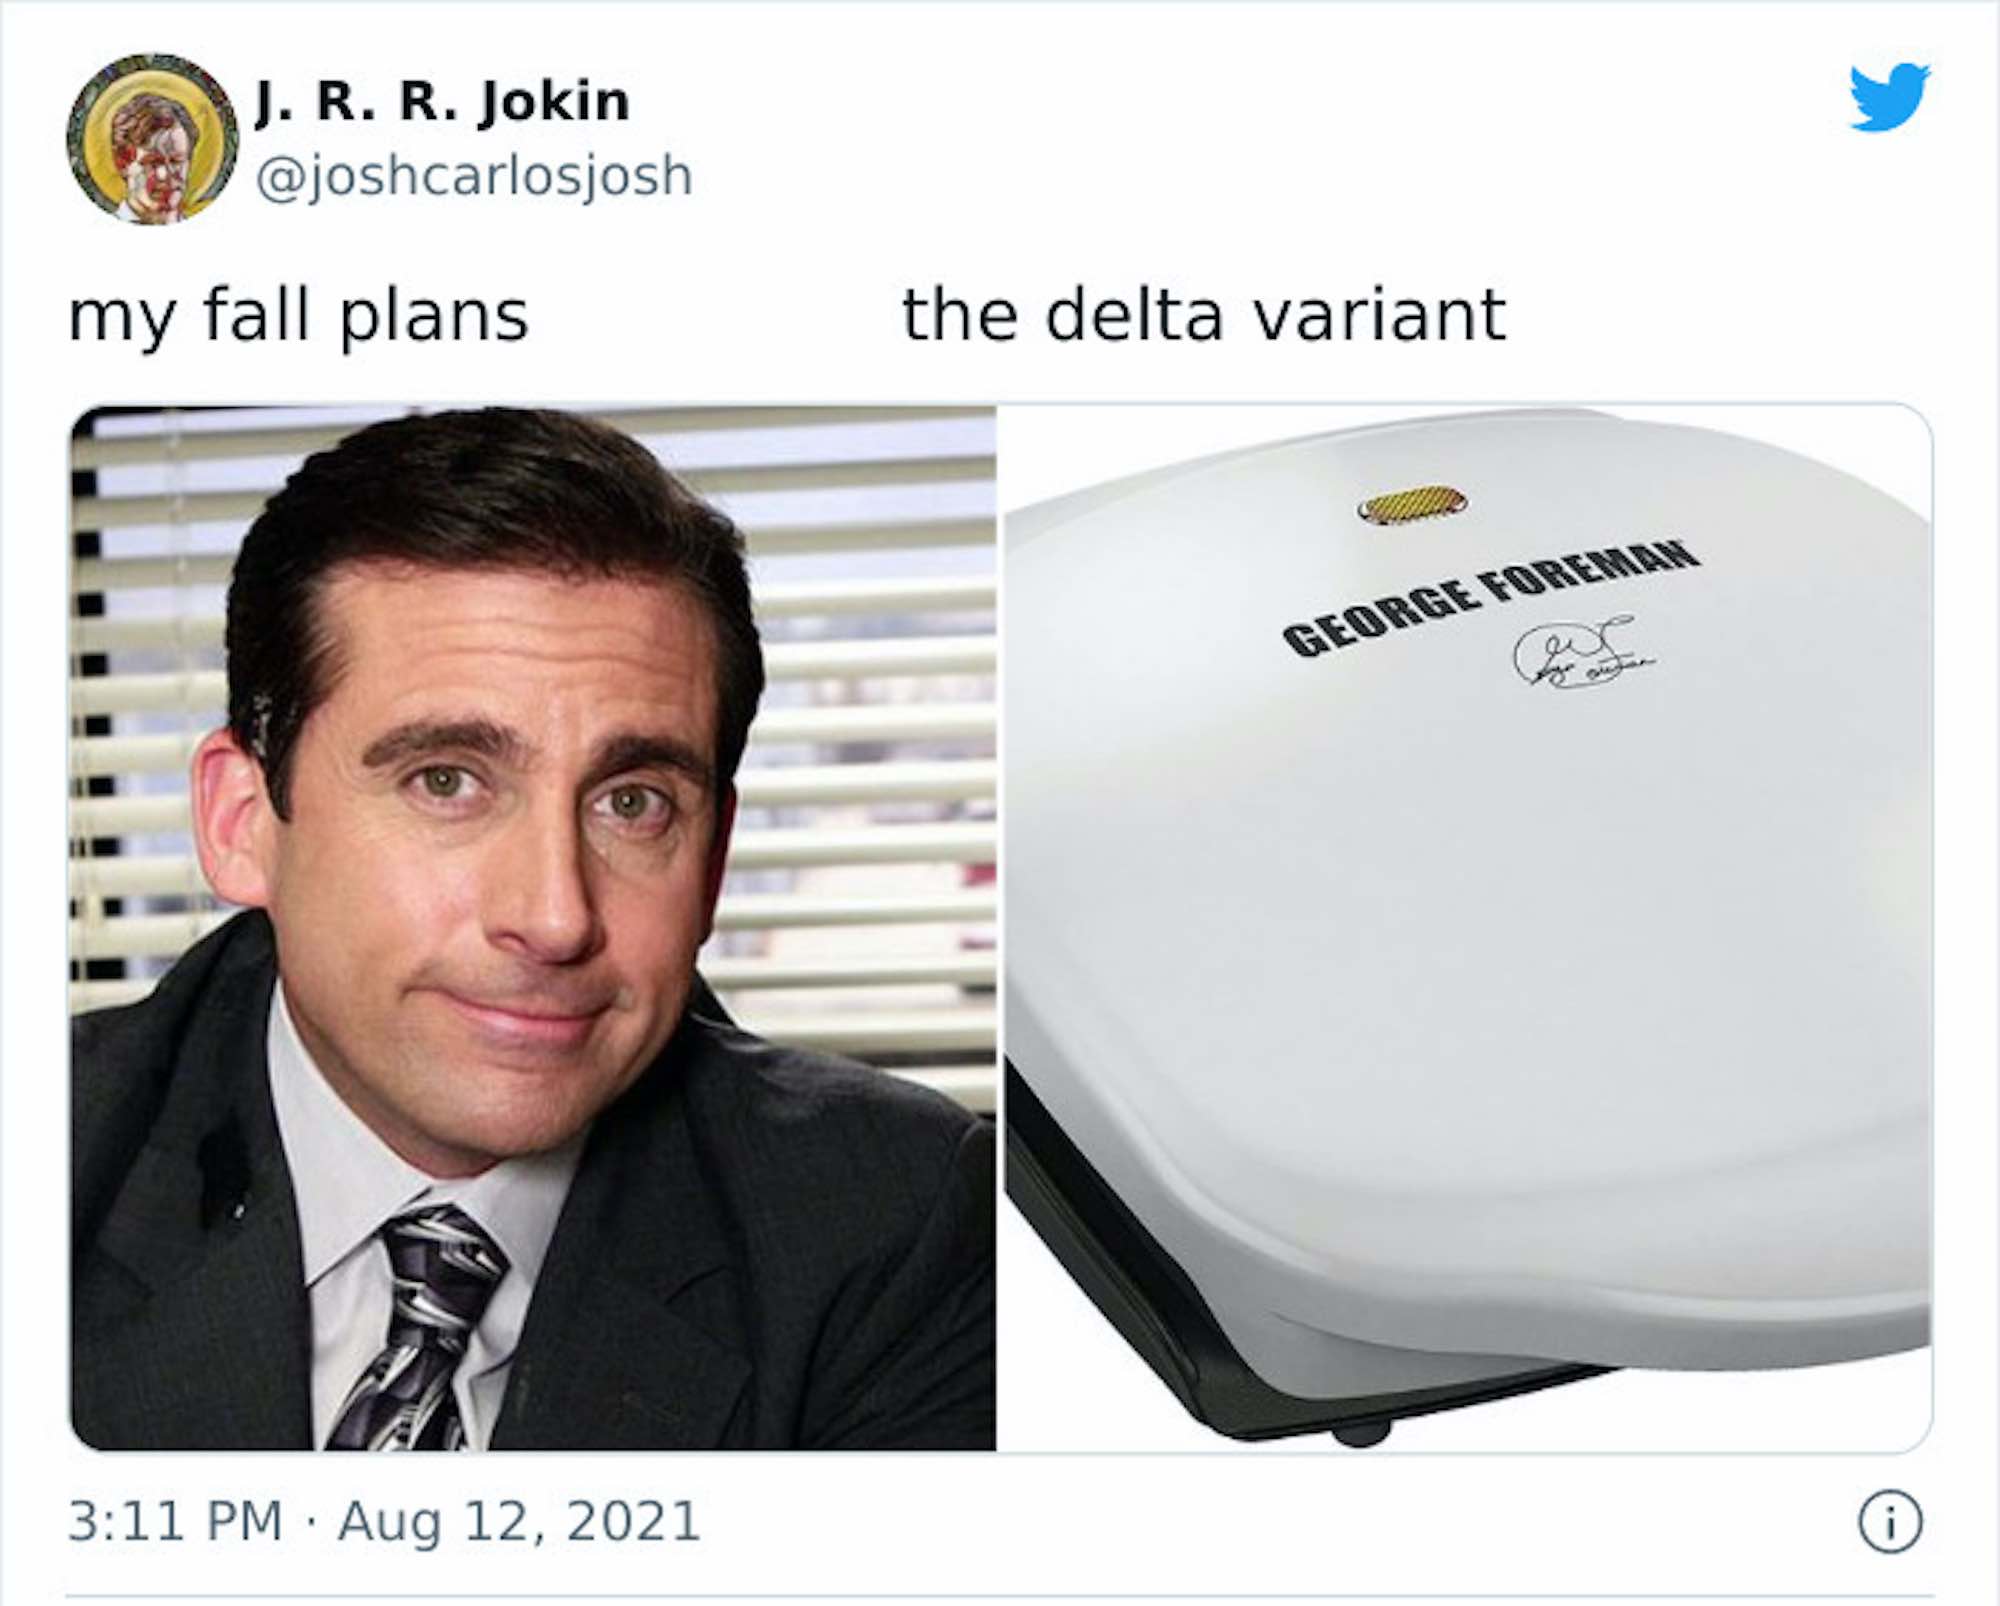 did-the-delta-variant-cancel-your-fall-plans-these-memes-explain-why